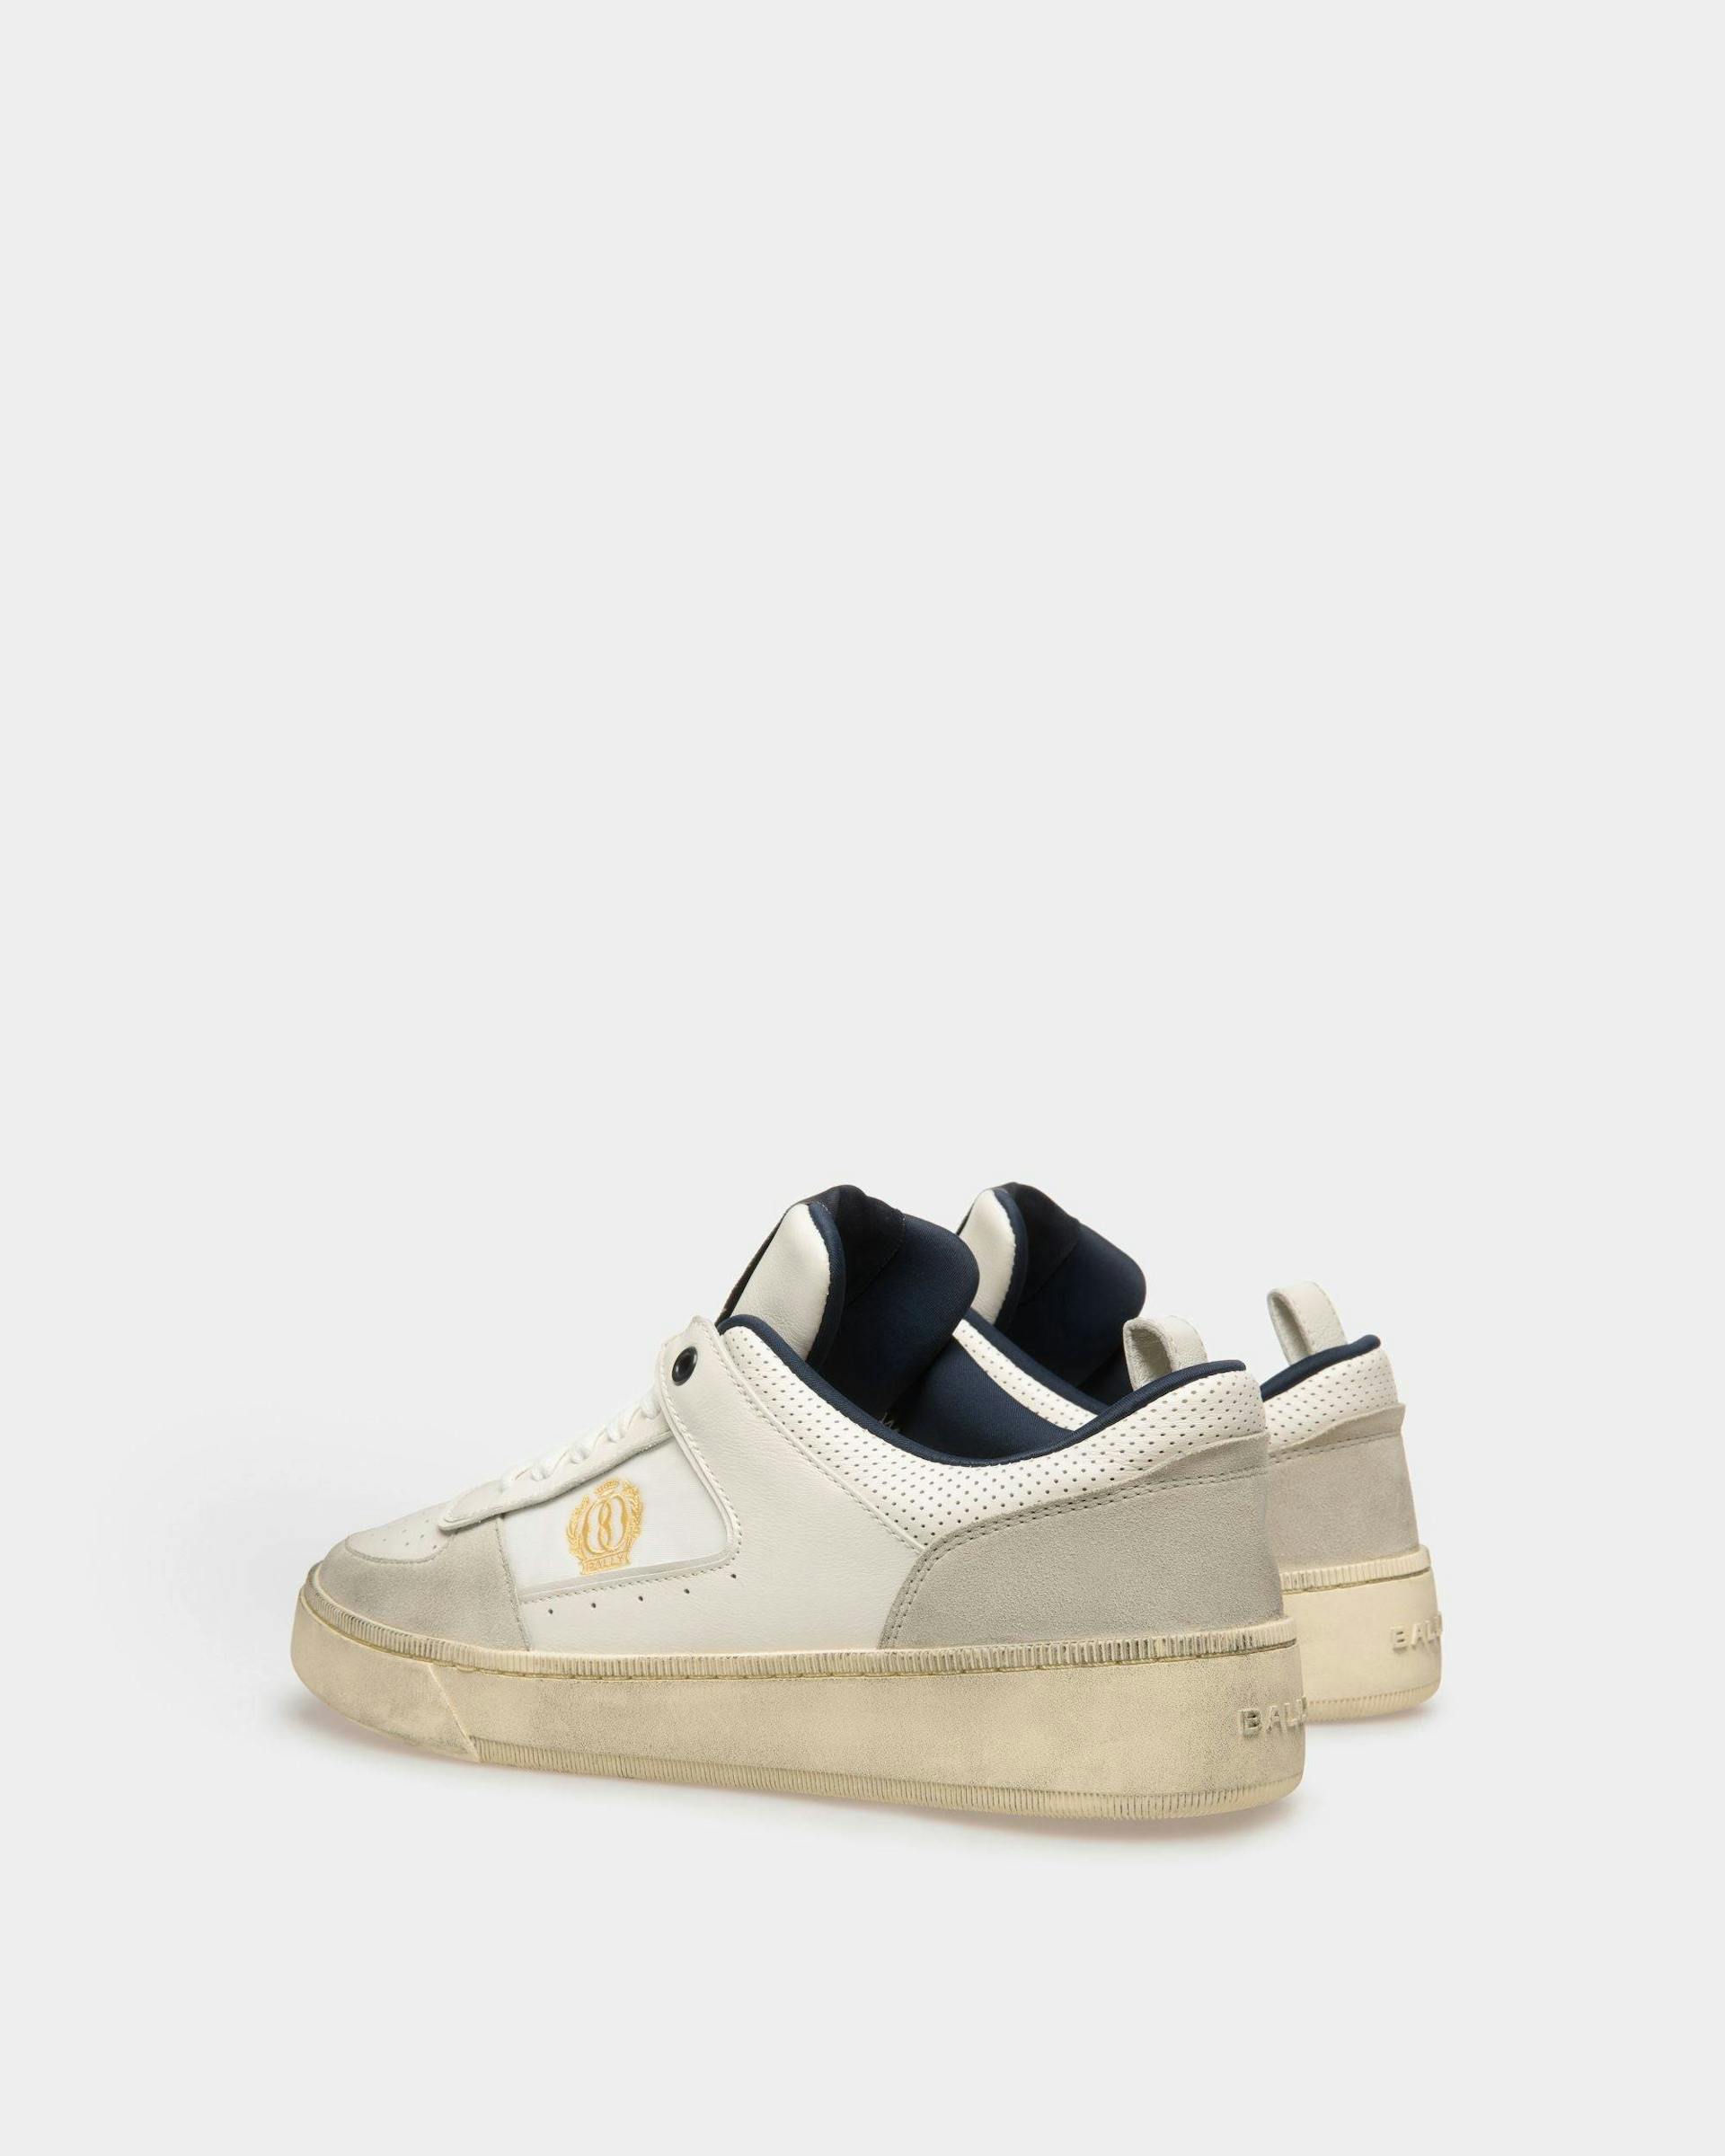 Raise Sneakers In Dusty White And Midnight Leather And Fabric - Men's - Bally - 03